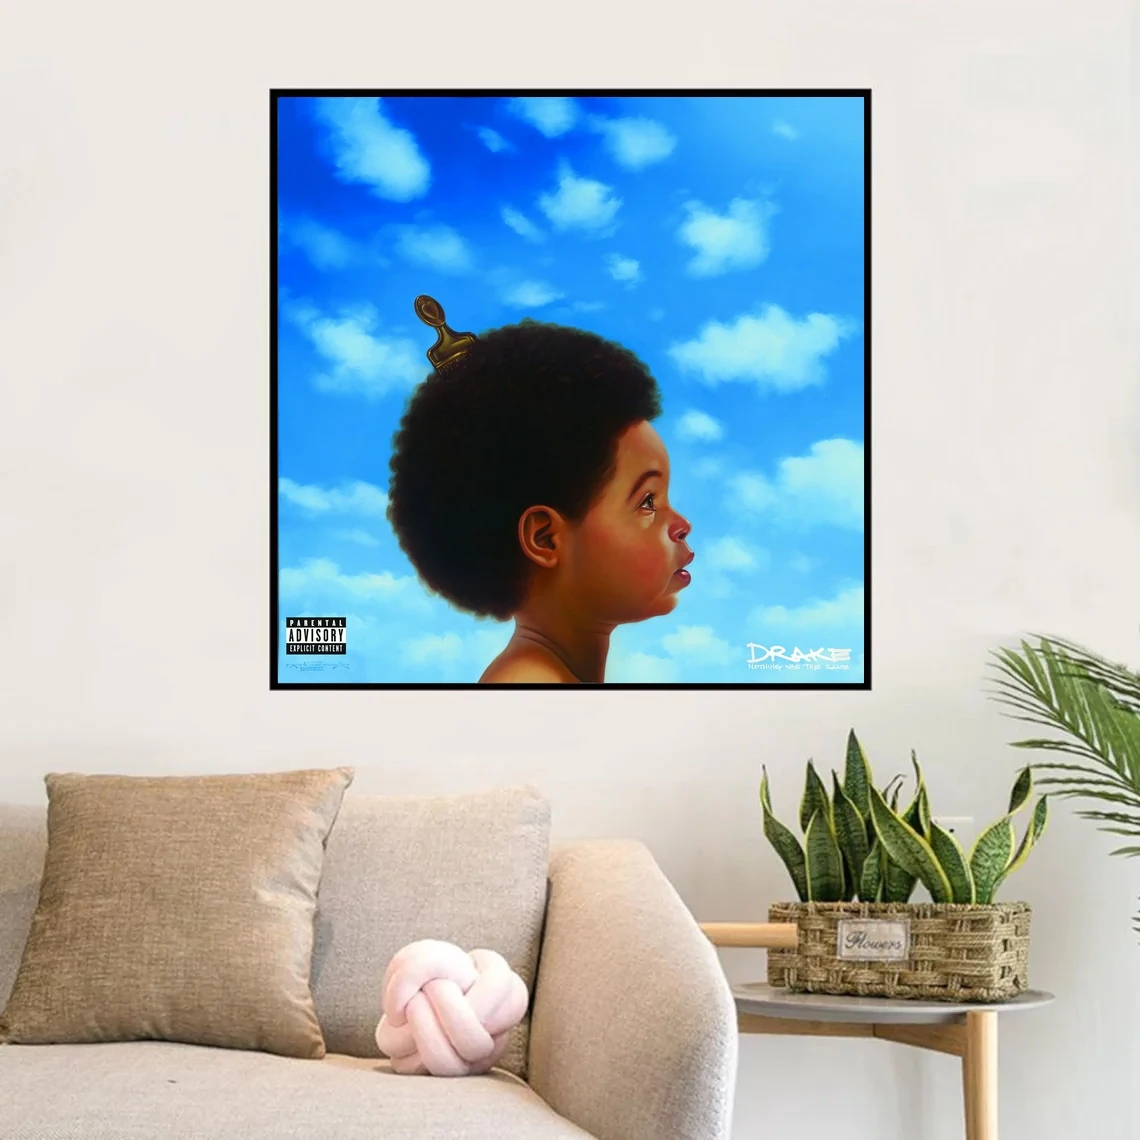 

Drake Poster Nothing Was The Same Rap Music Album Cover Poster Prints Art Canvas Painting Wall Living Room Home Decor (No Frame)